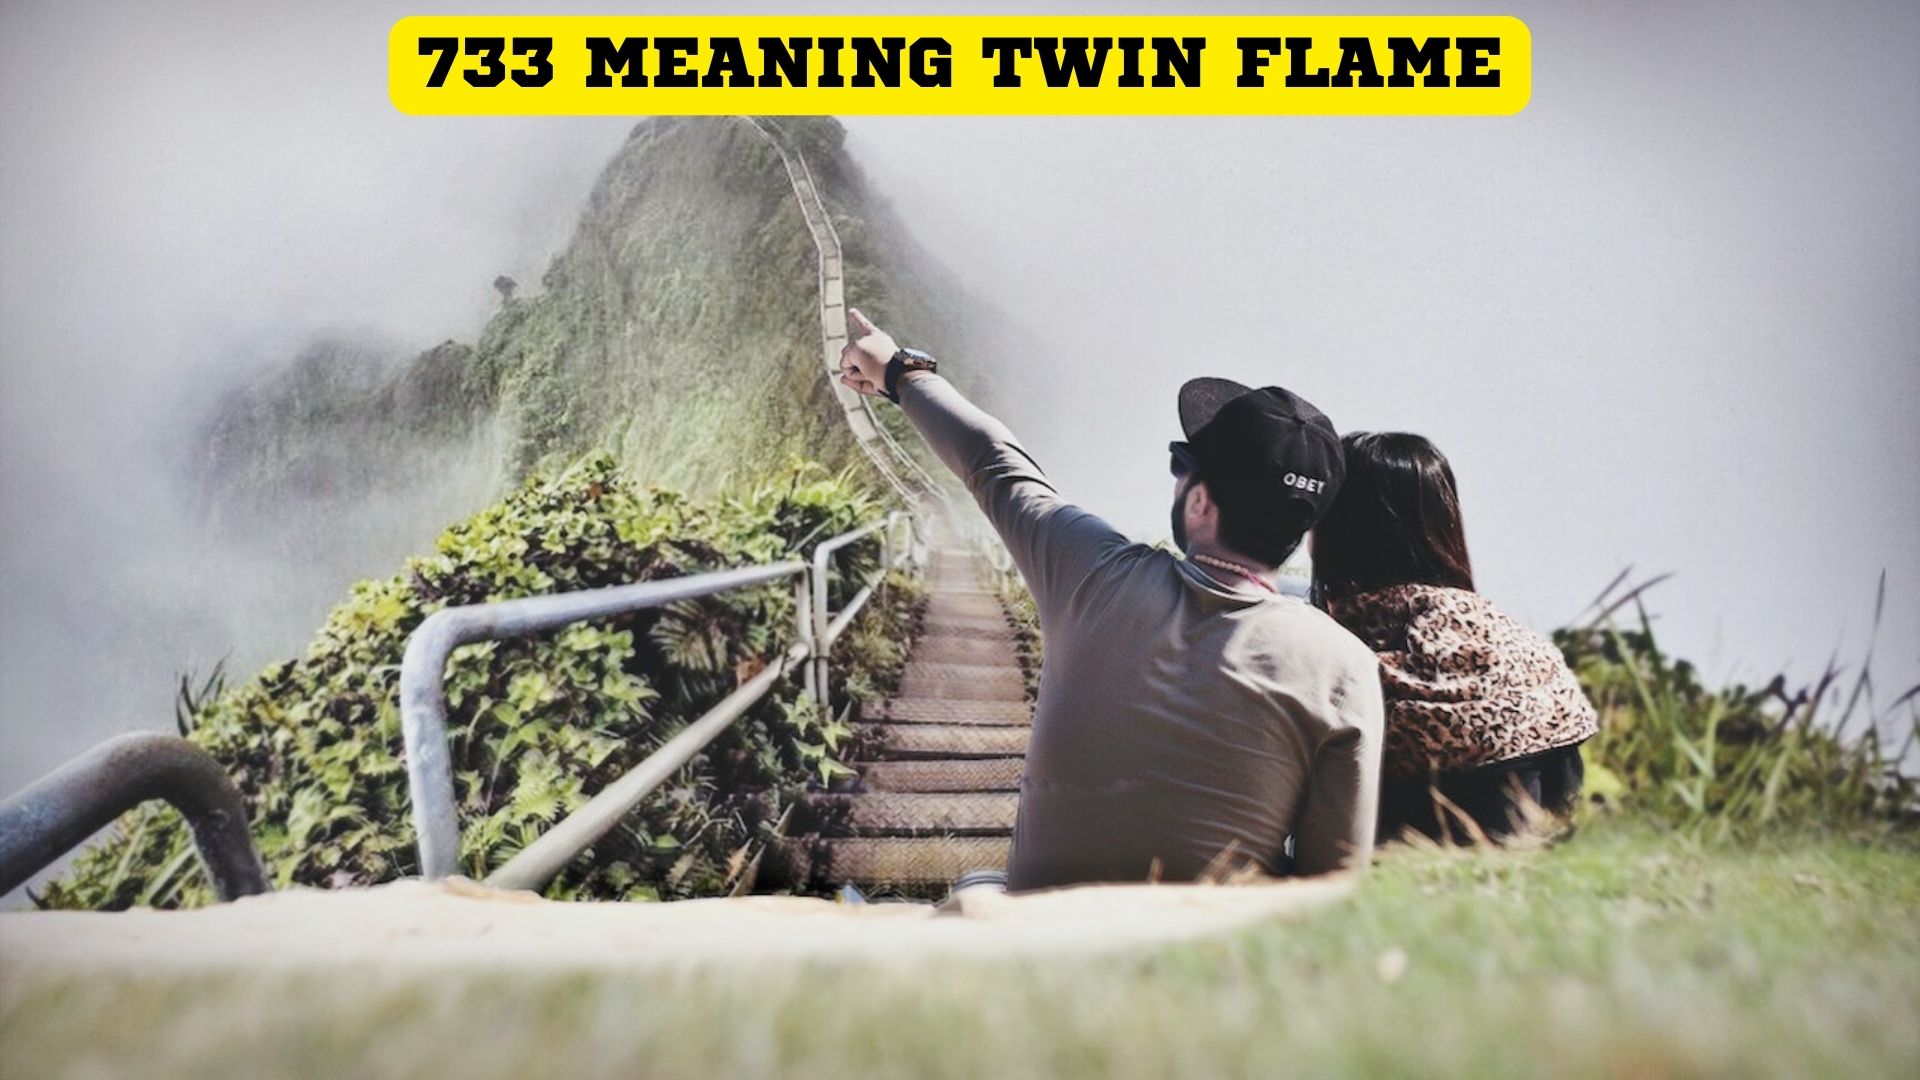 733 Meaning Twin Flame - You Will Soon Find Your Twin Flame